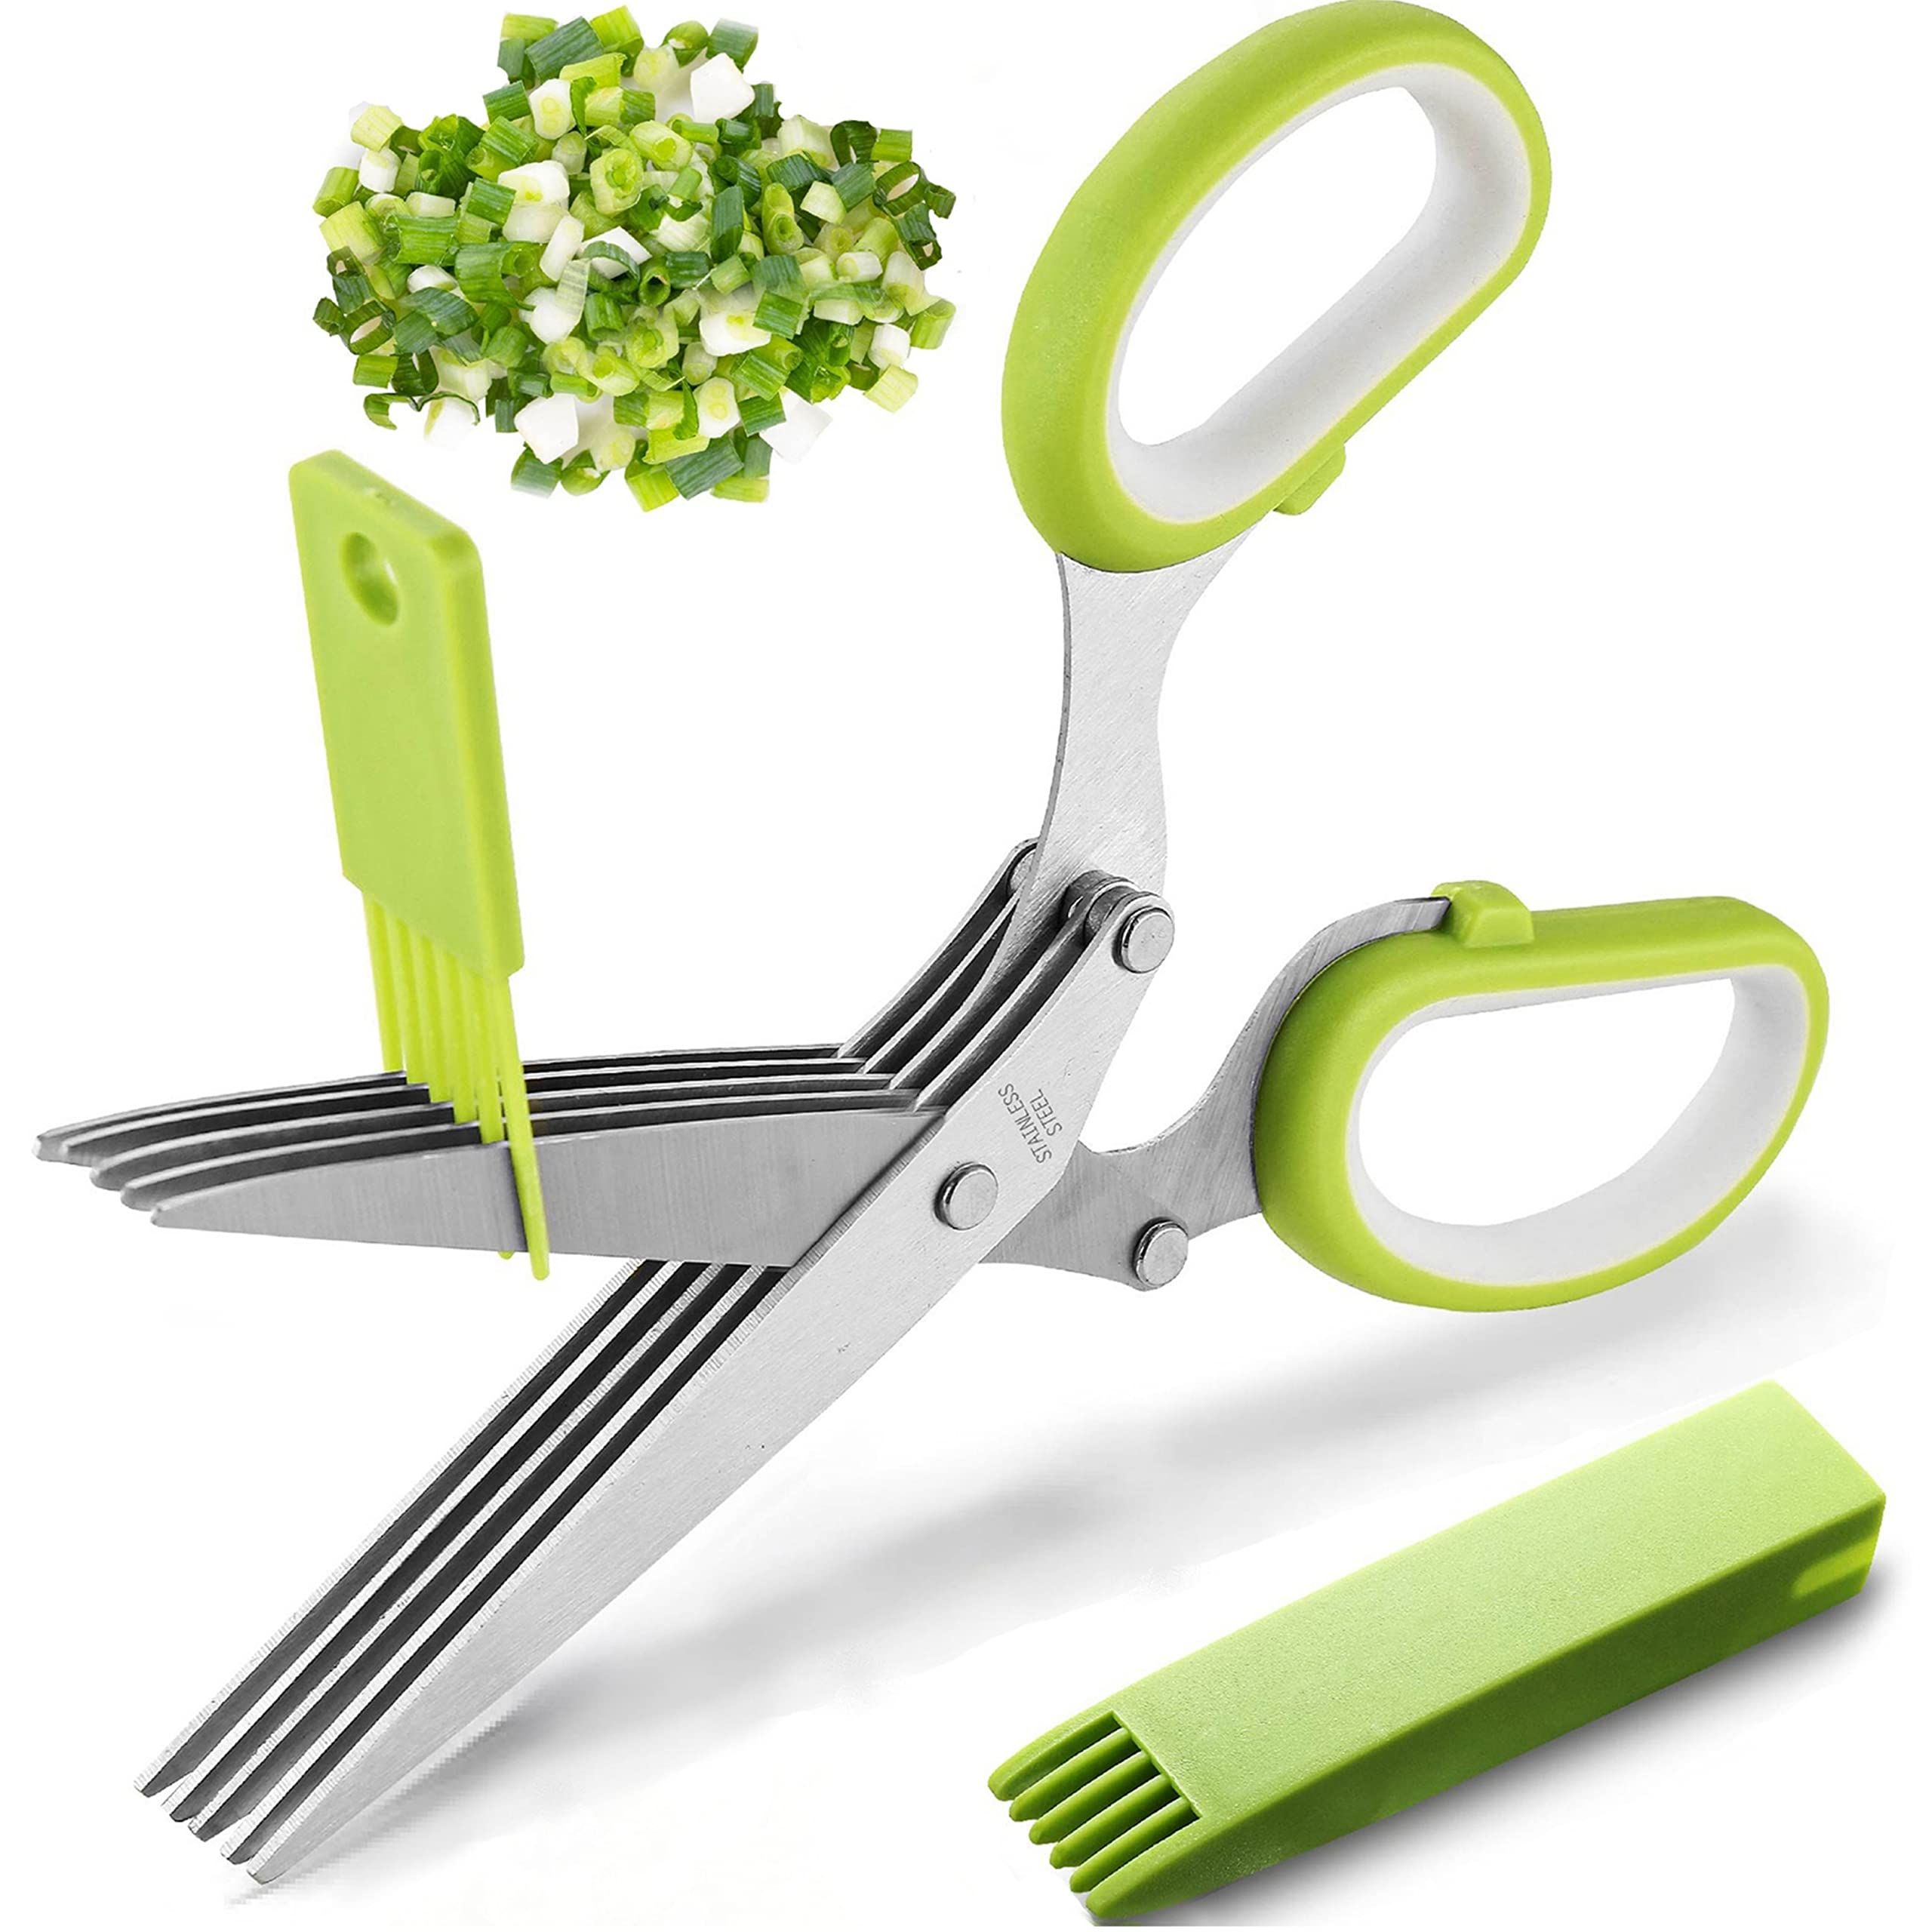 2021 Updated Herb Scissors Set - Herb Scissors With 5 Blades and Cover, Cool Kitchen Gadgets for ... | Amazon (US)